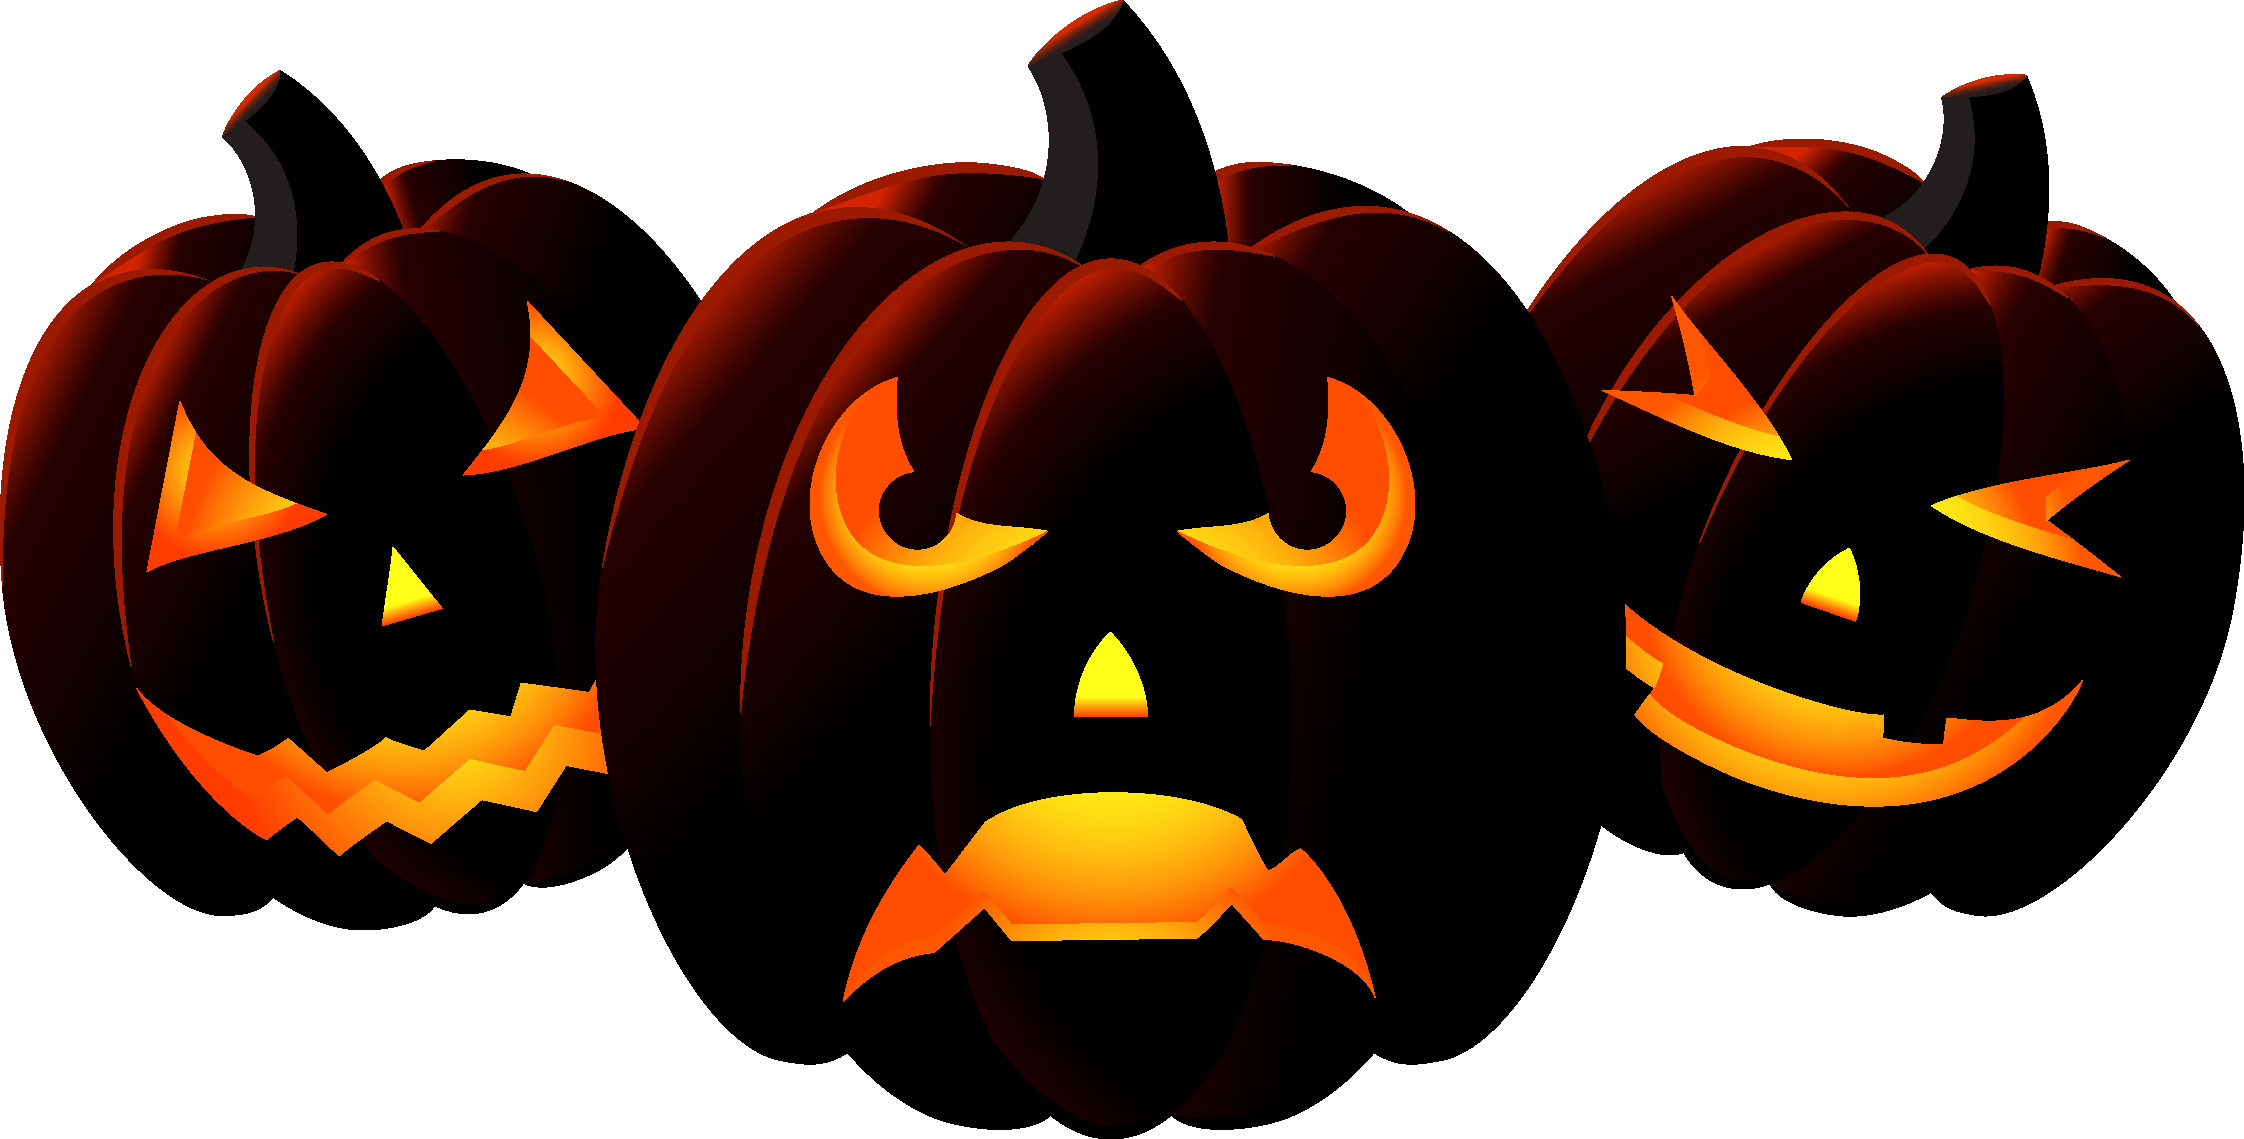 Download Scary Halloween Tens! Sounds Android Pumpkin HQ PNG Image in